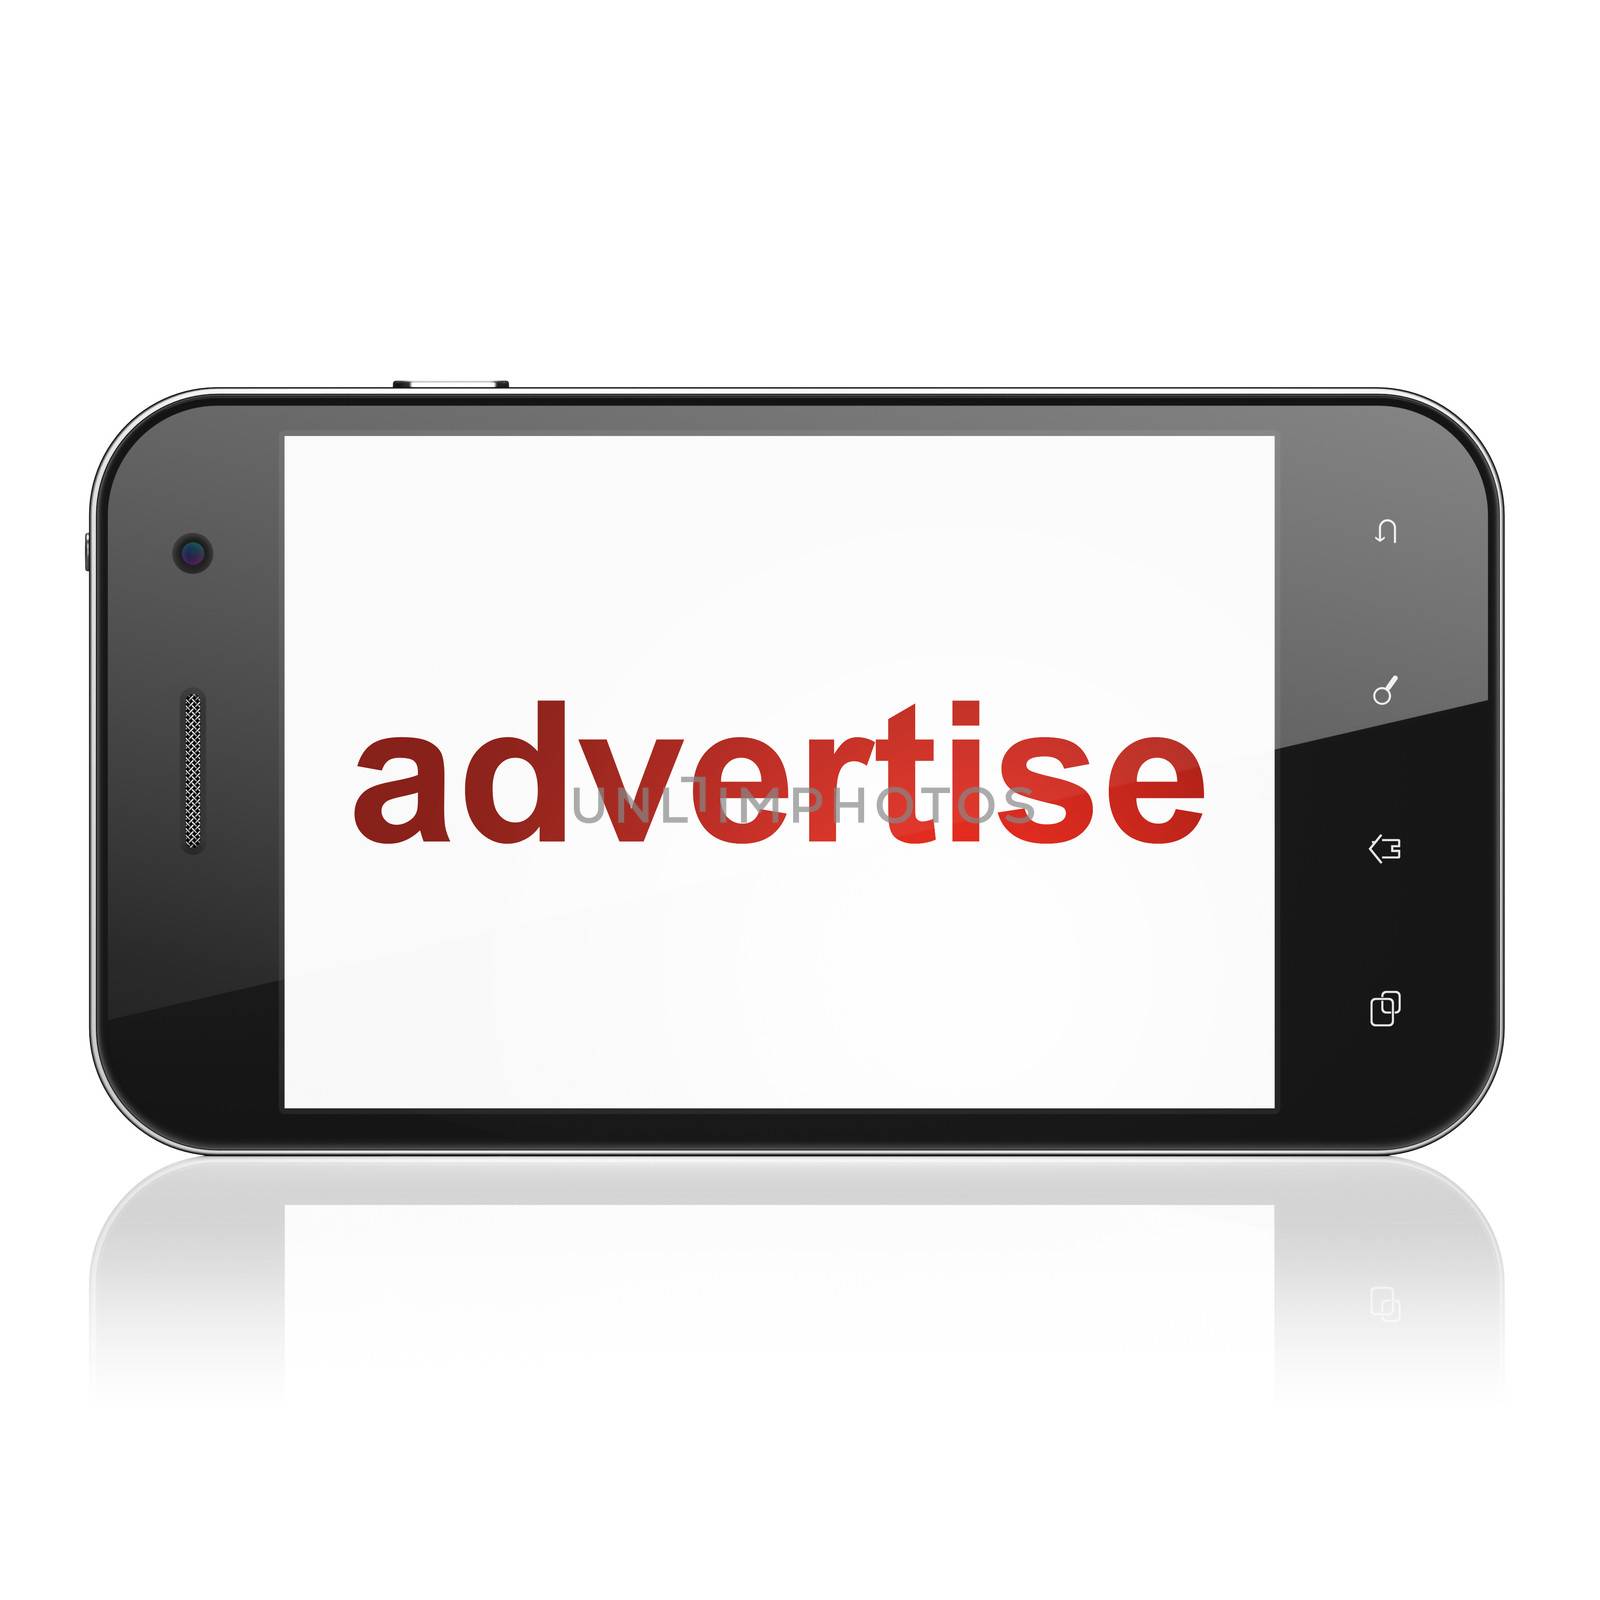 Advertising concept: smartphone with text Advertise on display. Mobile smart phone on White background, cell phone 3d render